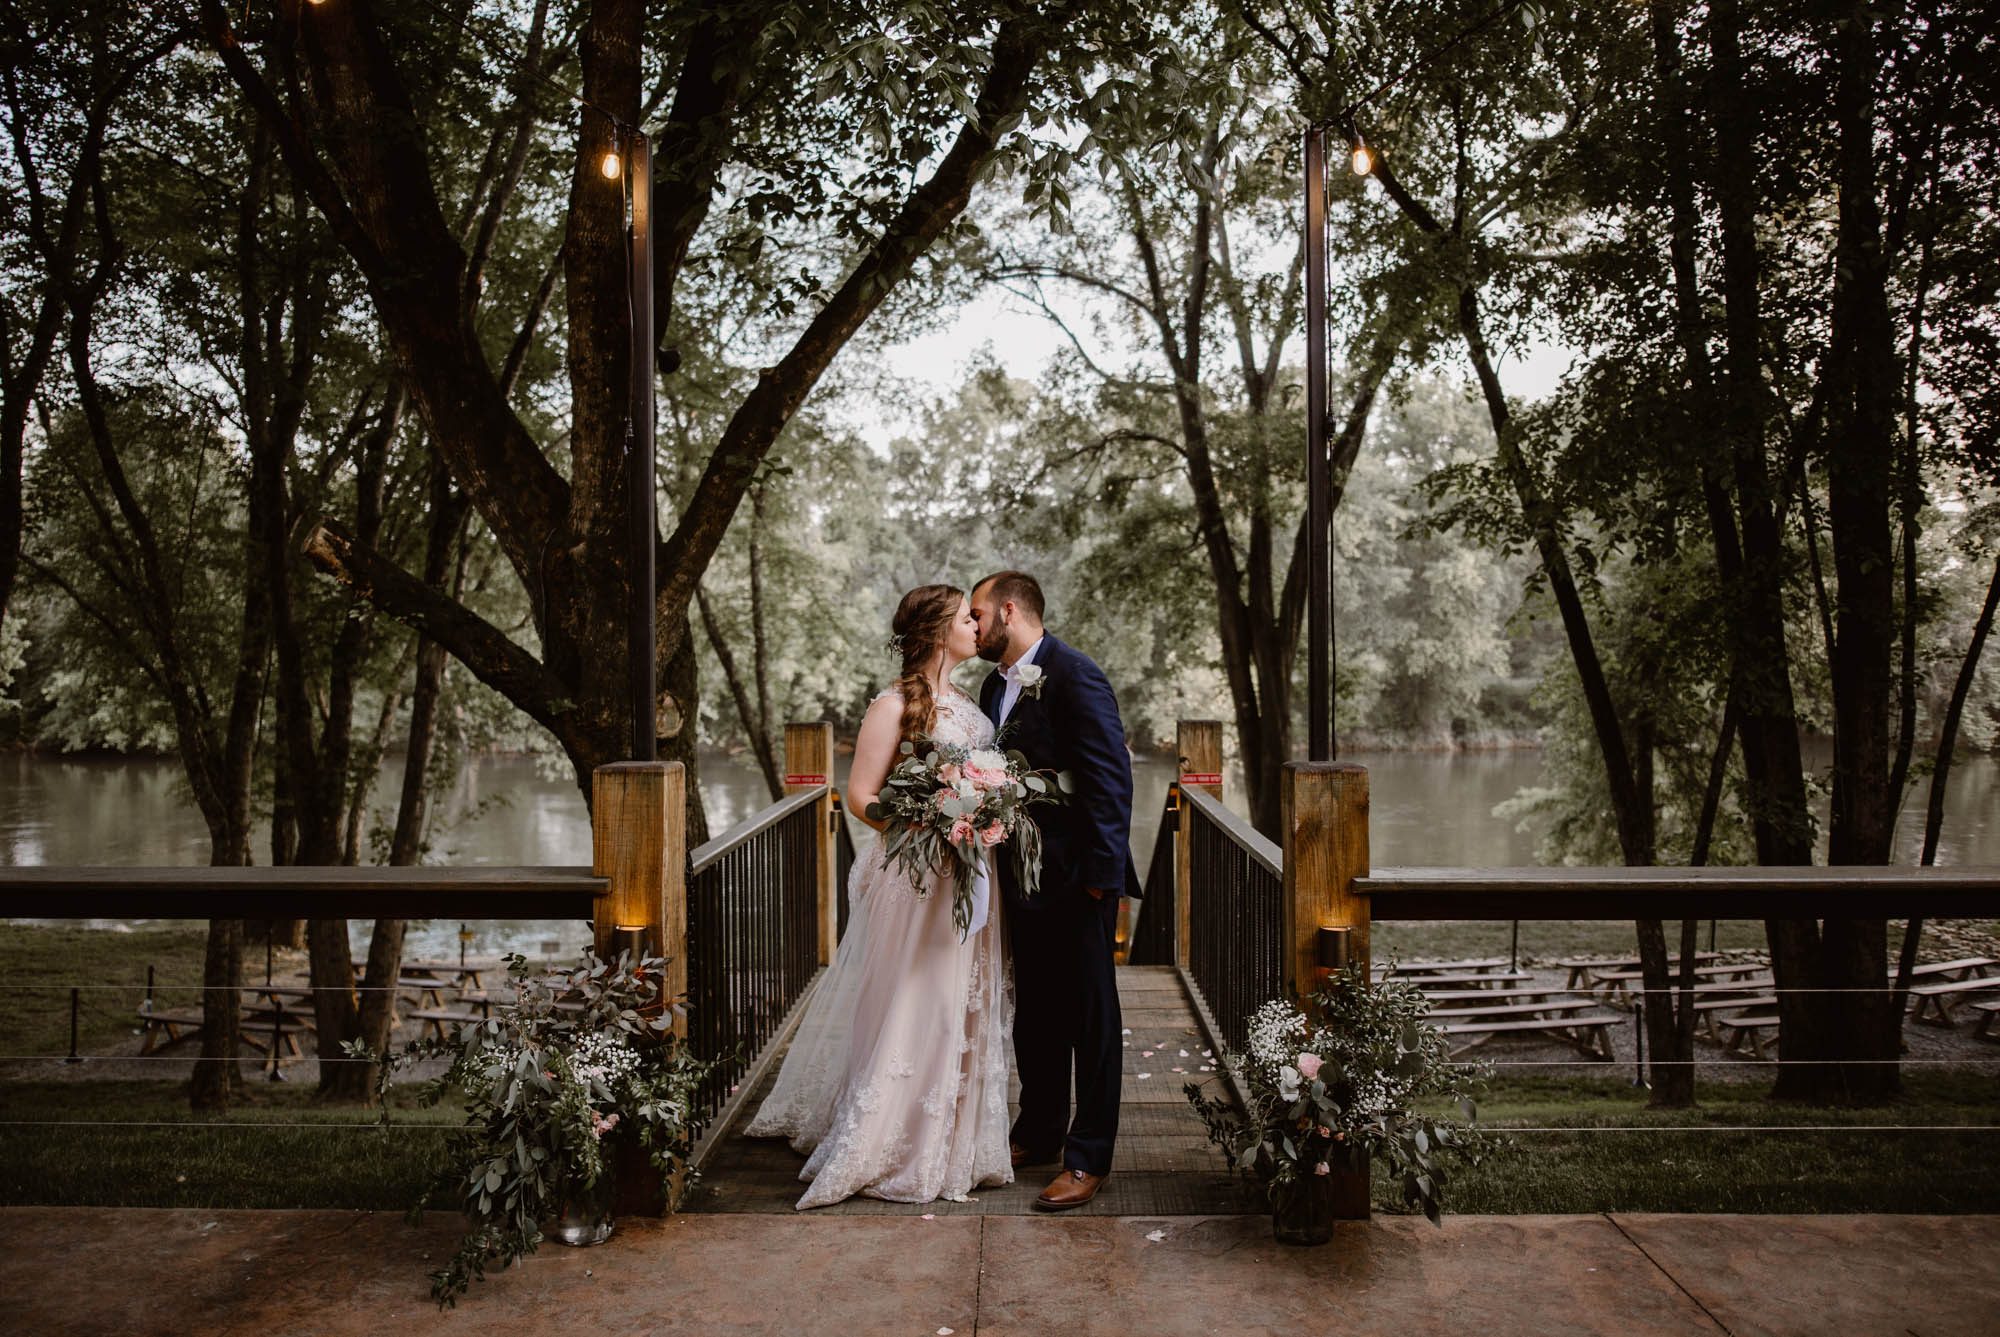 Golden Hour Photography at Hiwassee River Weddings